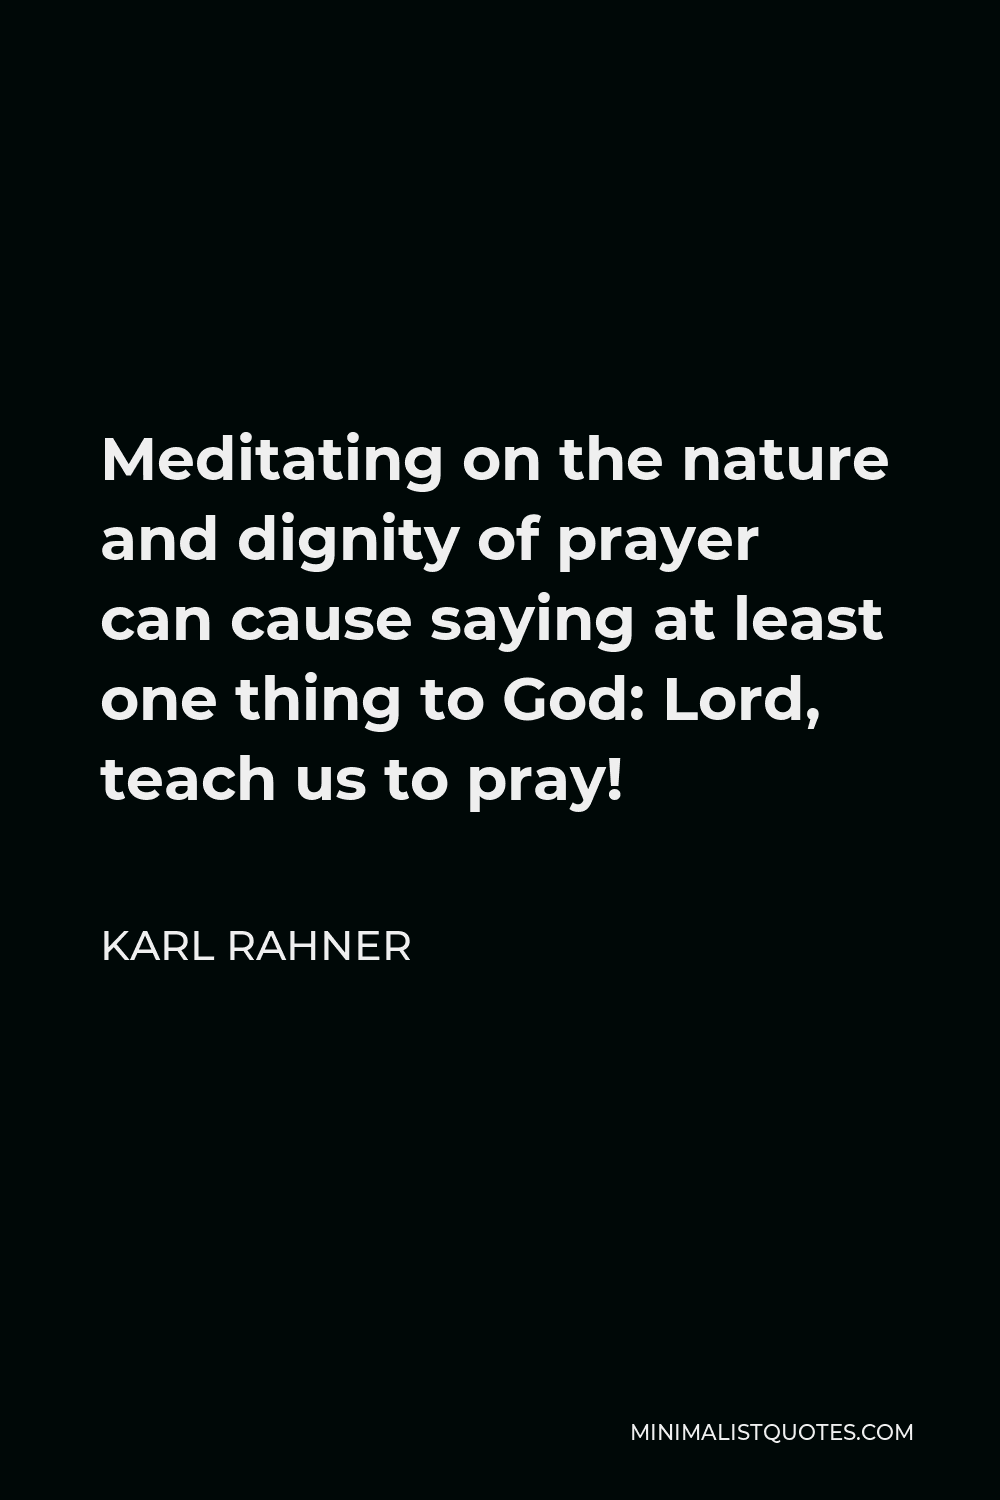 Karl Rahner Quote - Meditating on the nature and dignity of prayer can cause saying at least one thing to God: Lord, teach us to pray!